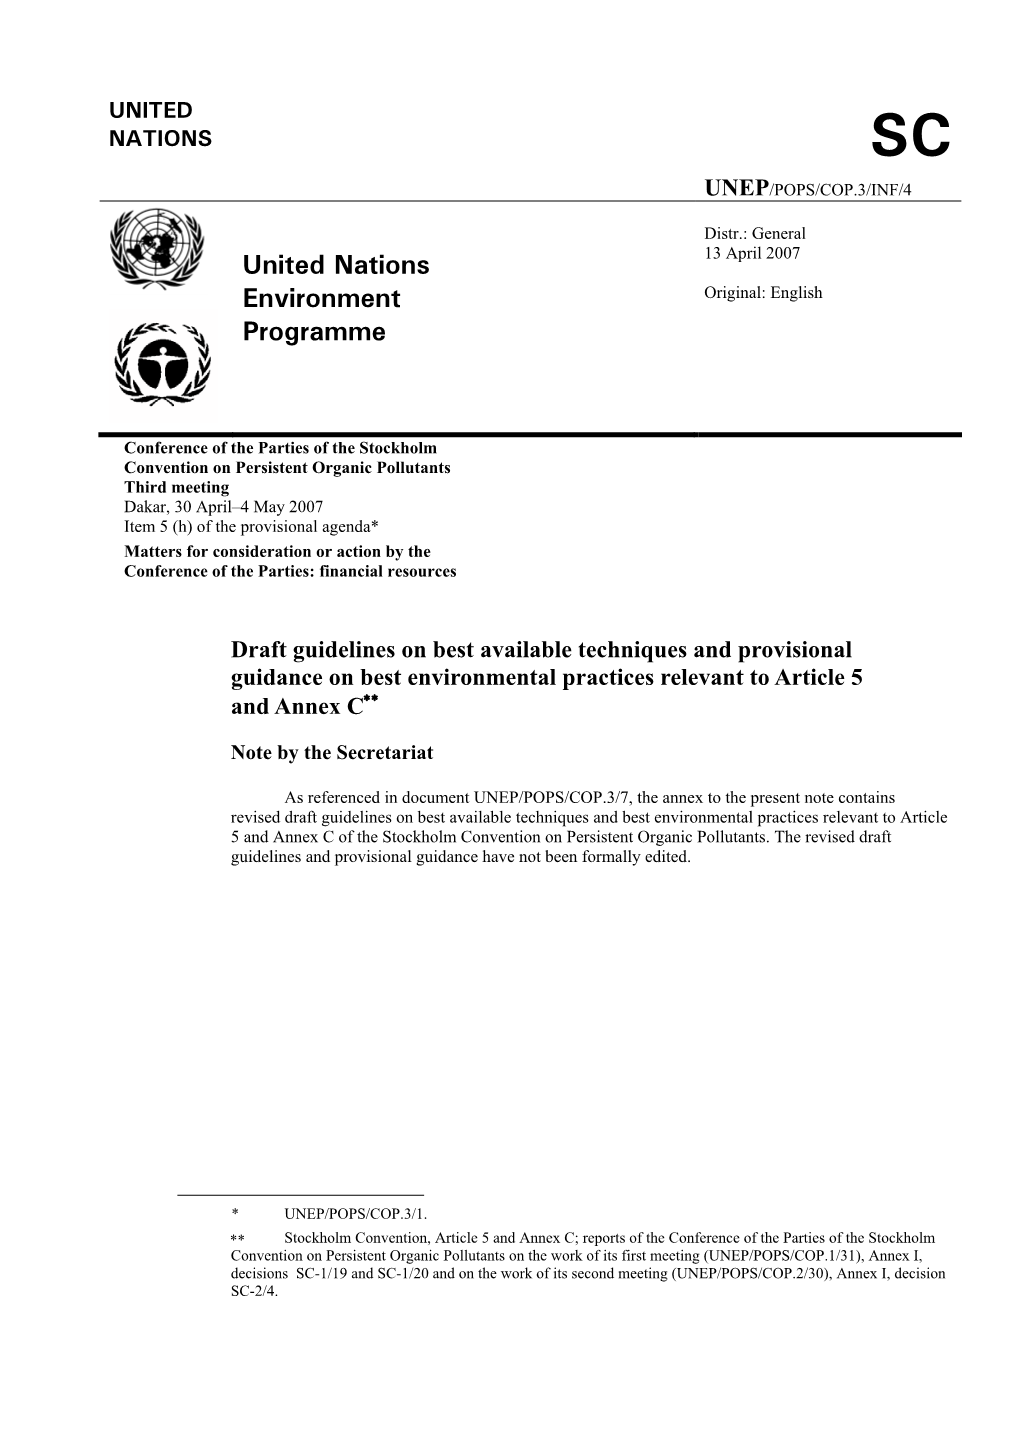 United Nations Environment Programme)